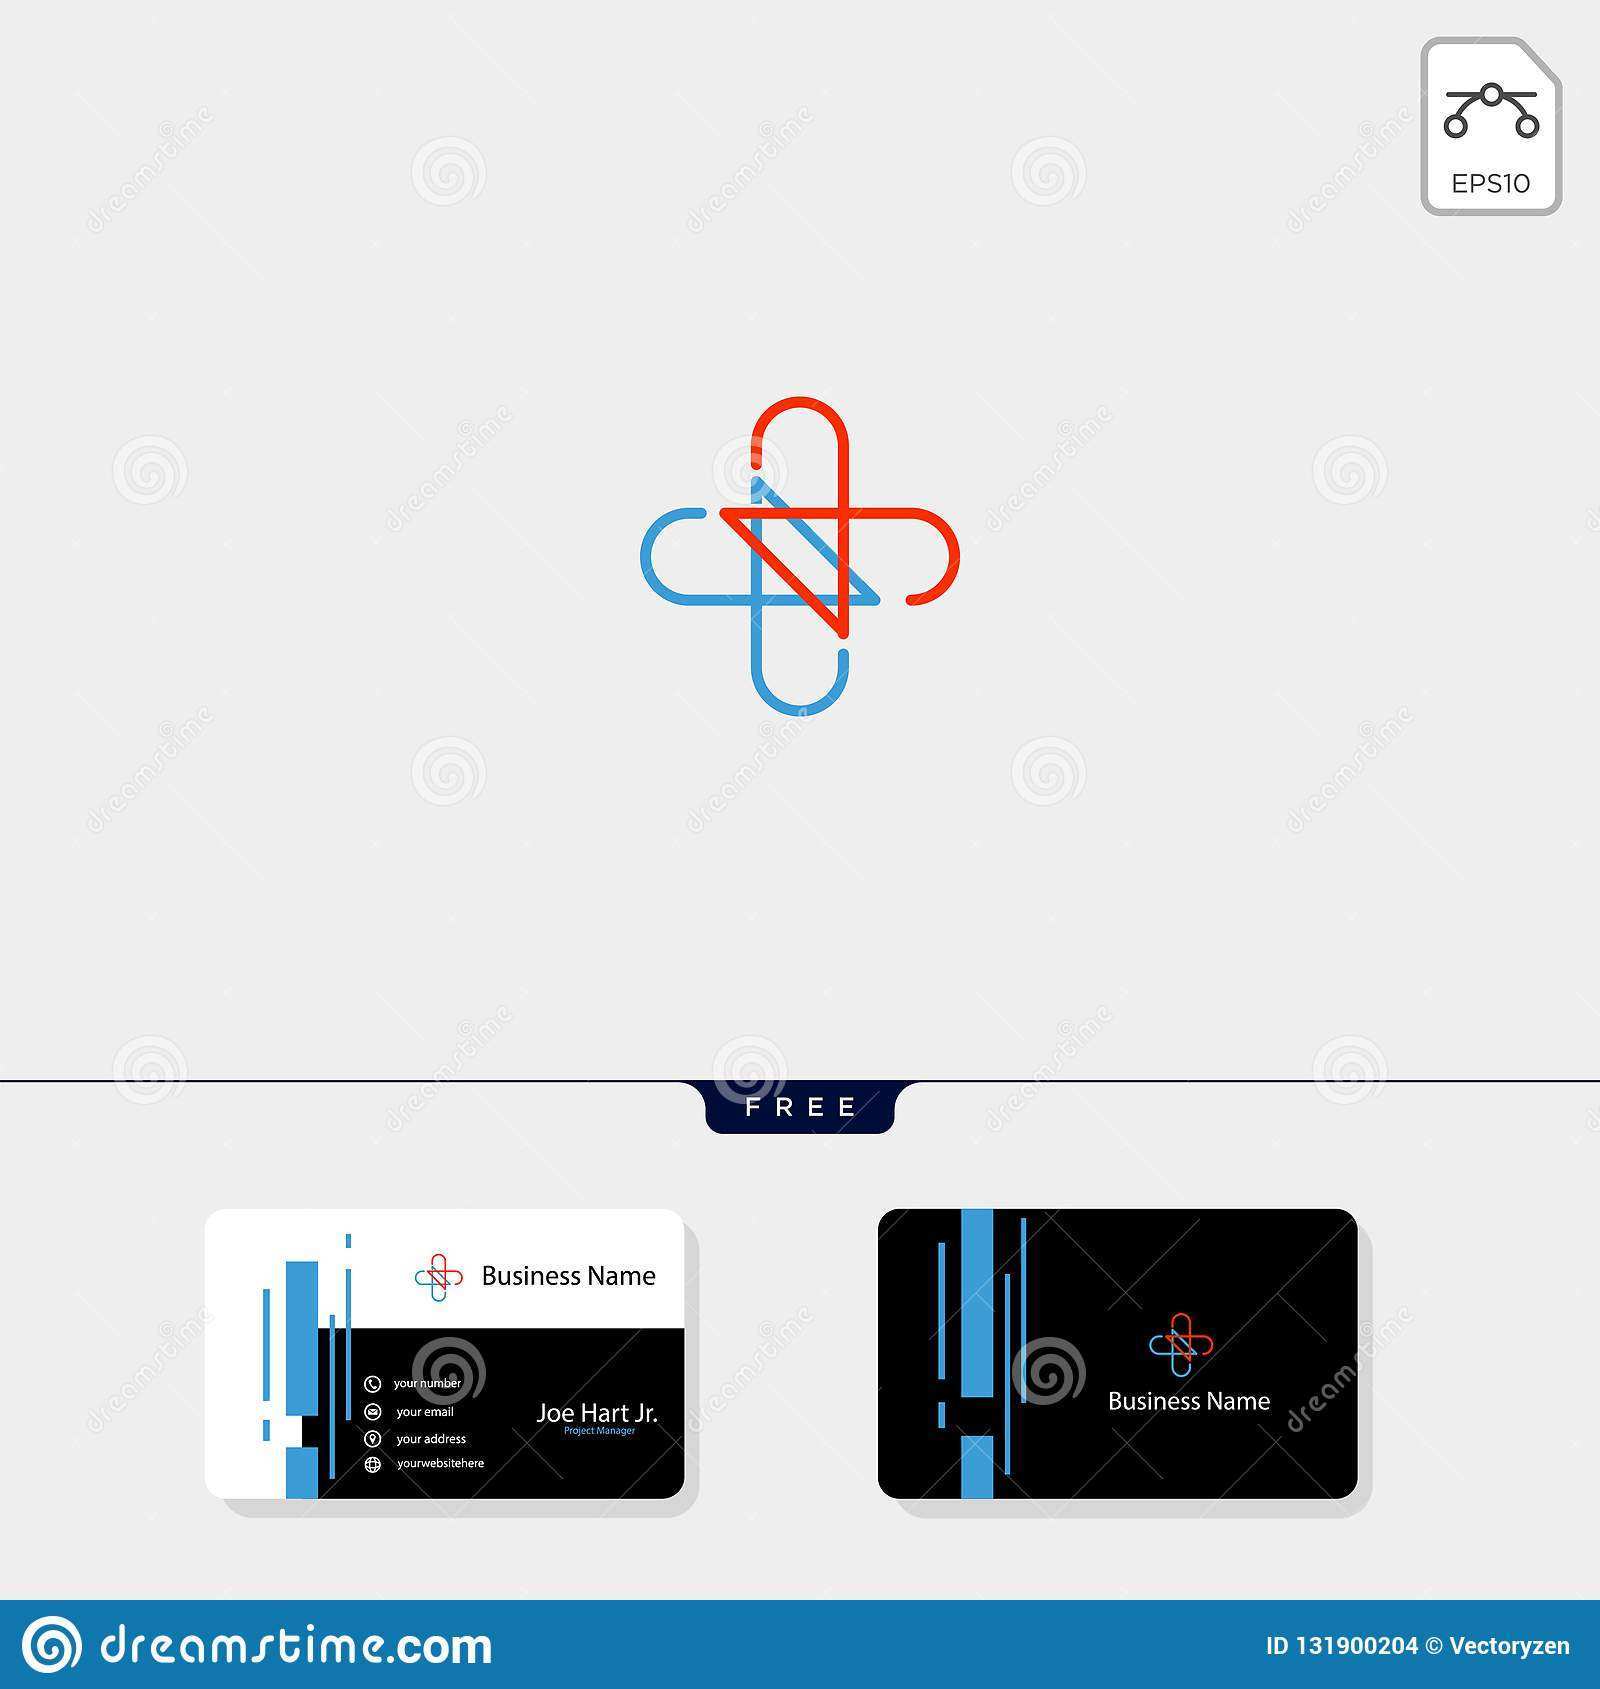 17 Online Medical Business Card Template Illustrator With Stunning Design by Medical Business Card Template Illustrator